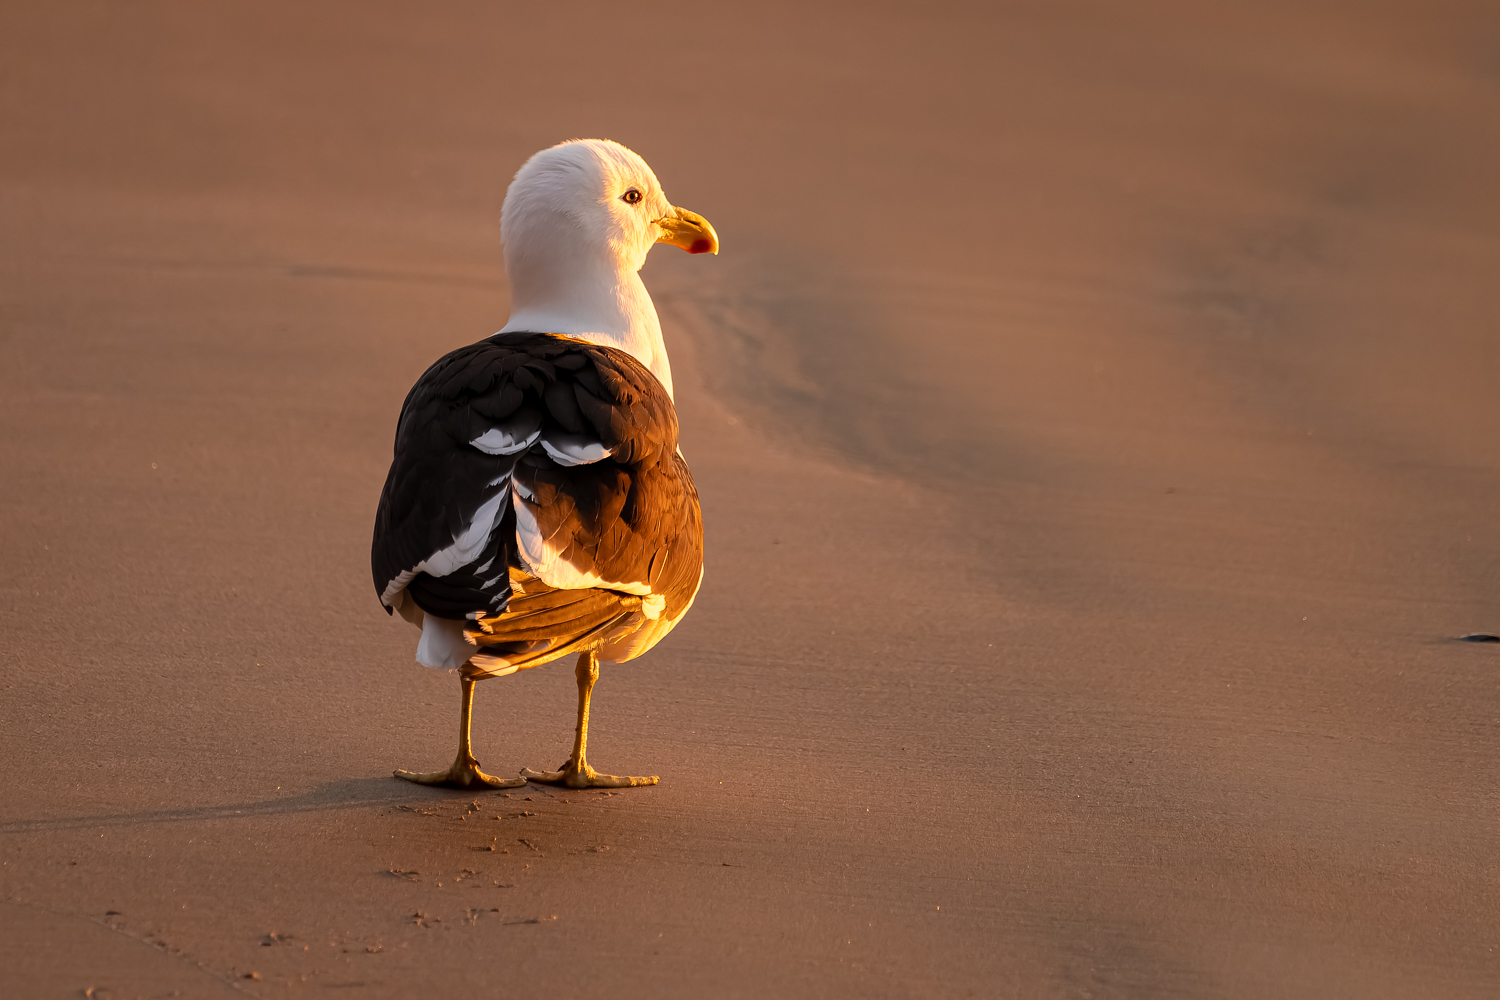 A gull facing away from the camera on the beach in early morning light